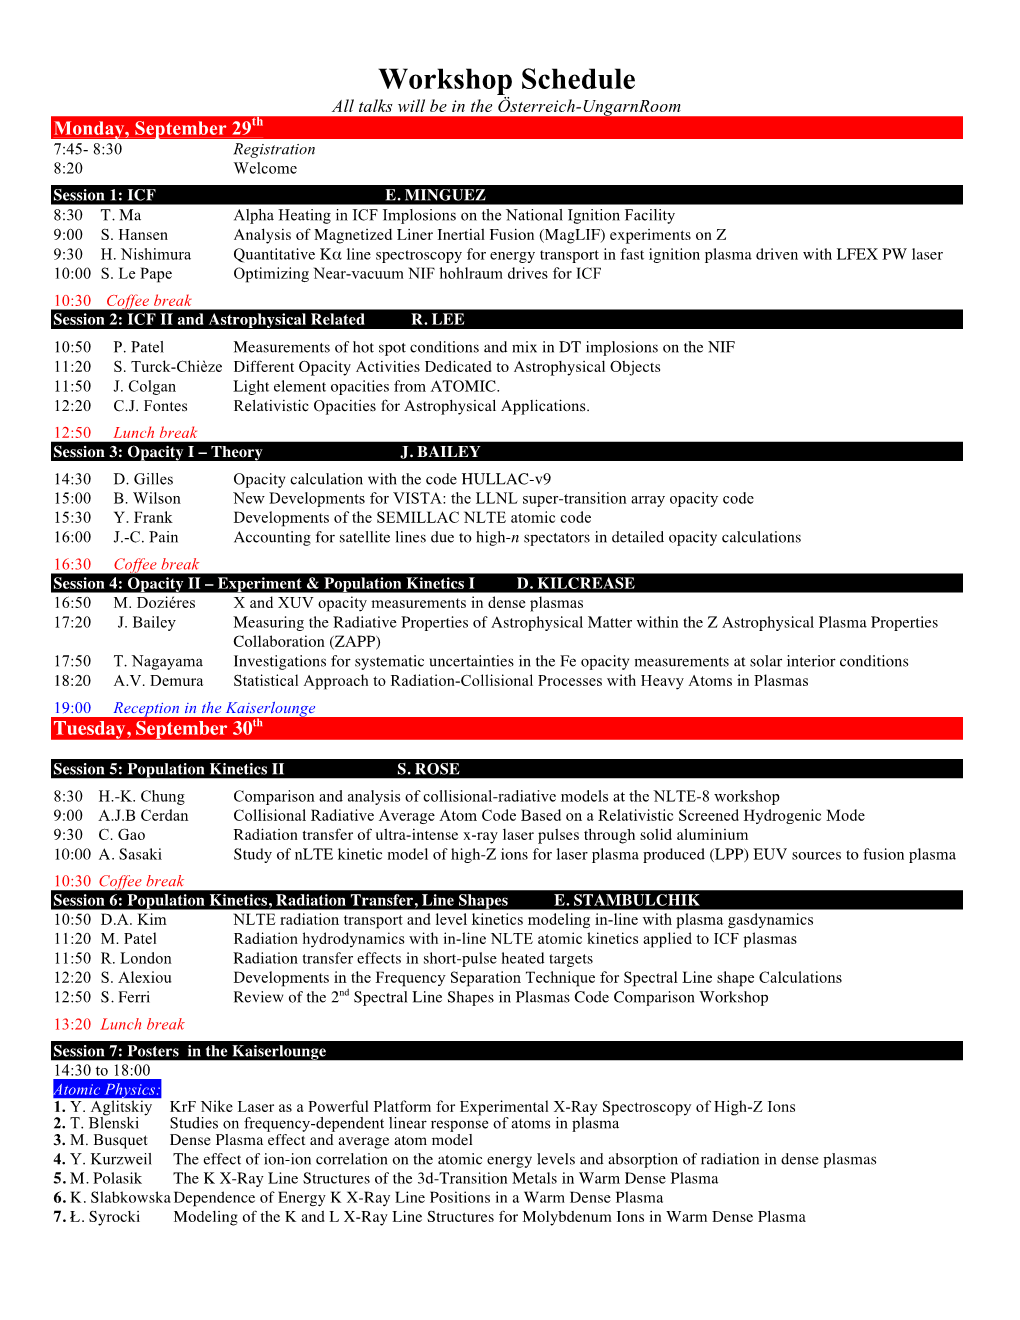 Workshop Schedule All Talks Will Be in the Österreich-Ungarnroom Monday, September 29Th 7:45- 8:30 Registration 8:20 Welcome